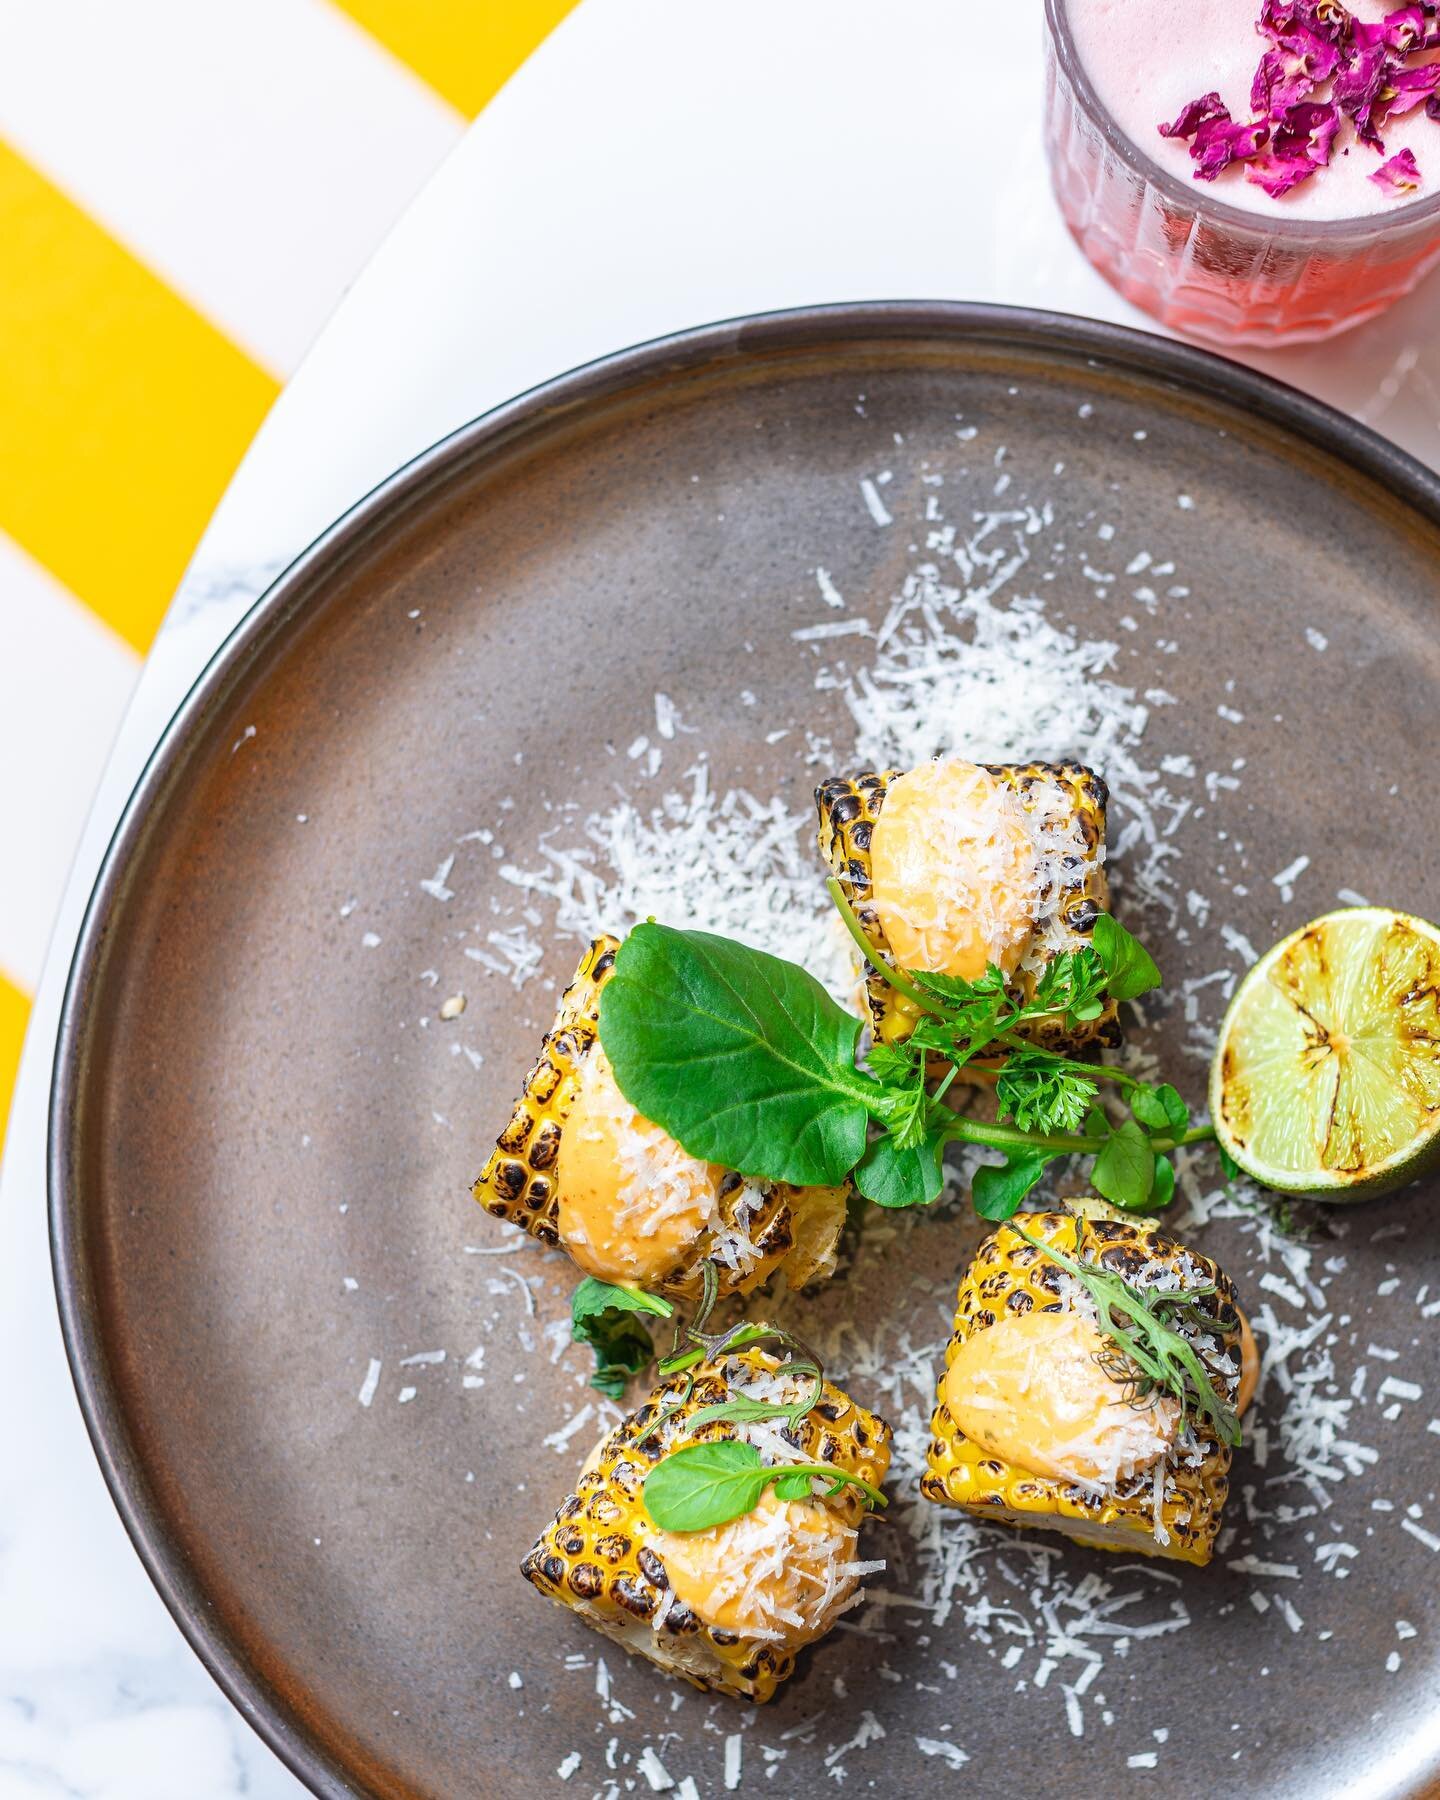 We&rsquo;re providing a feast for the senses with our mouthwatering share plates.

From chilli and nori salt squid to torched corn cobs, each dish is a celebration of fresh, modern Australian flavours. Grab your crew and dig in.